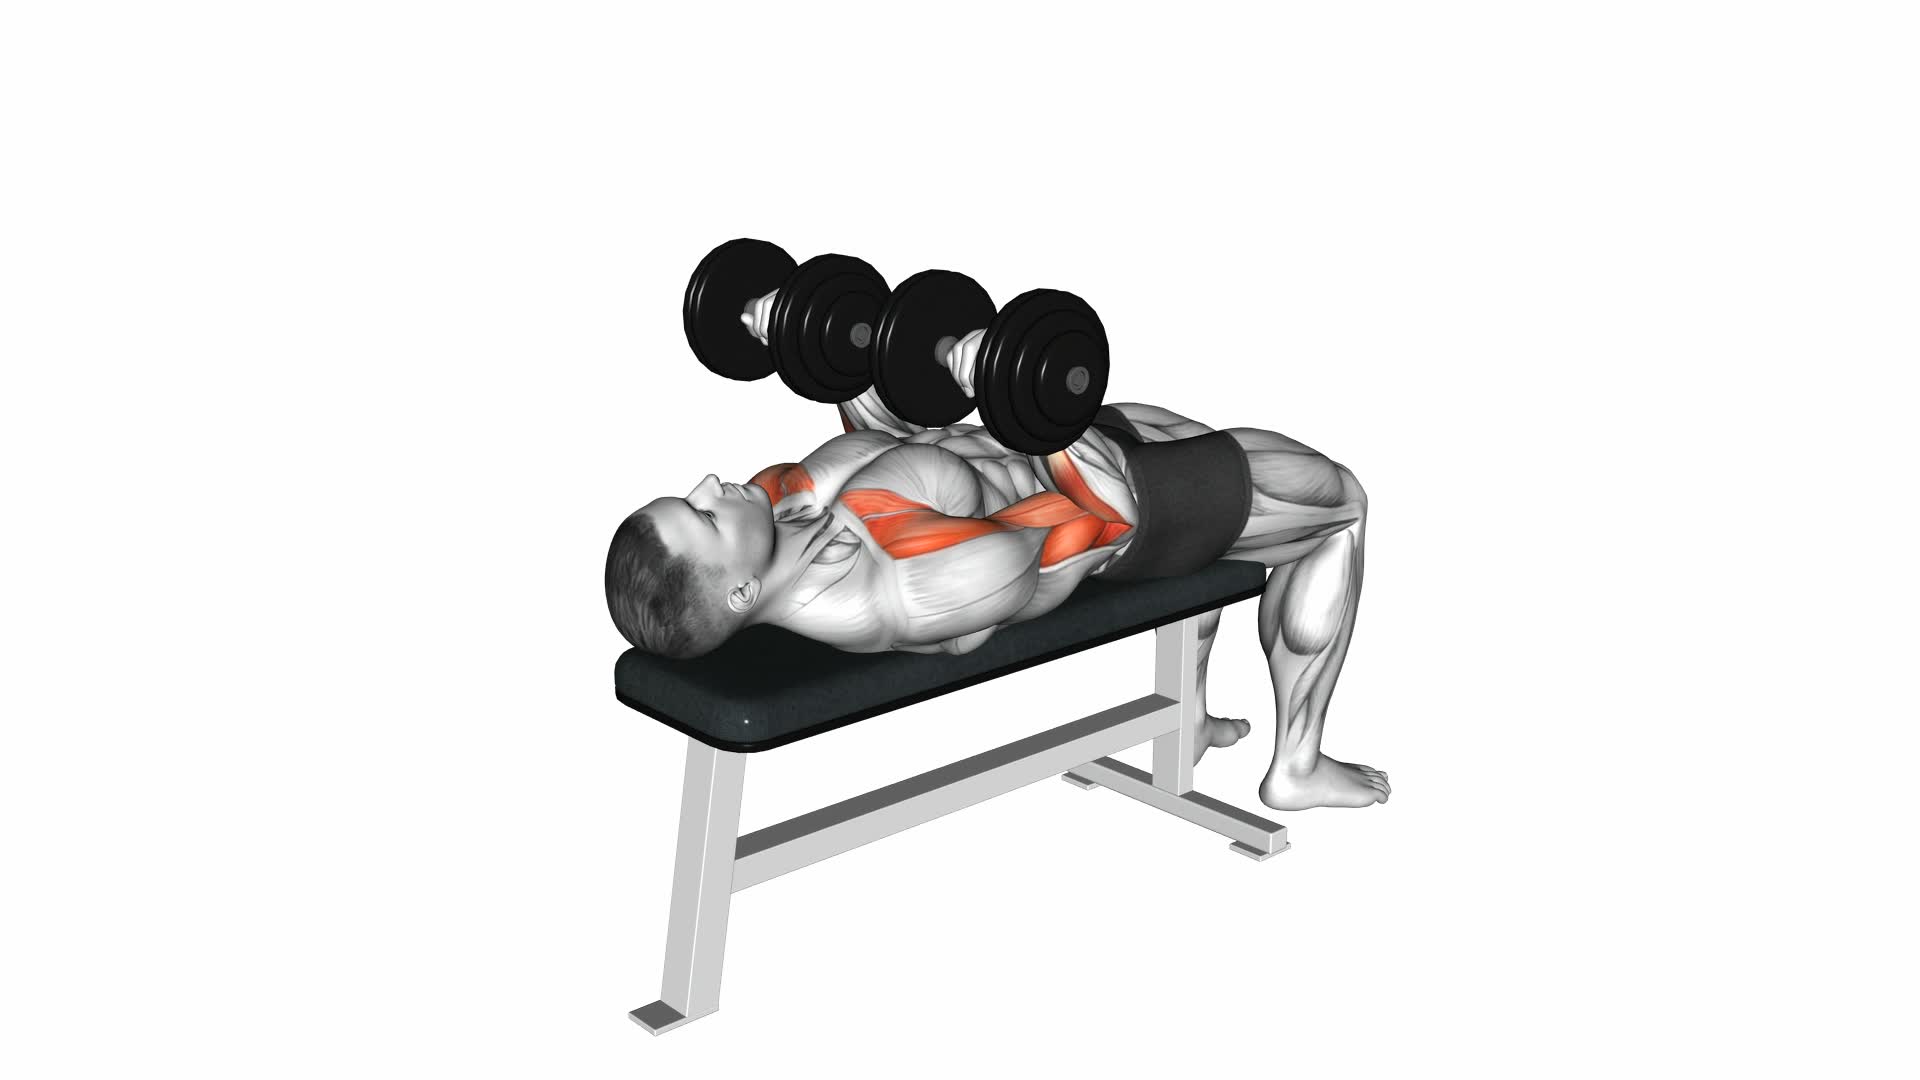 Dumbbell Lying Supine Curl - Video Exercise Guide & Tips